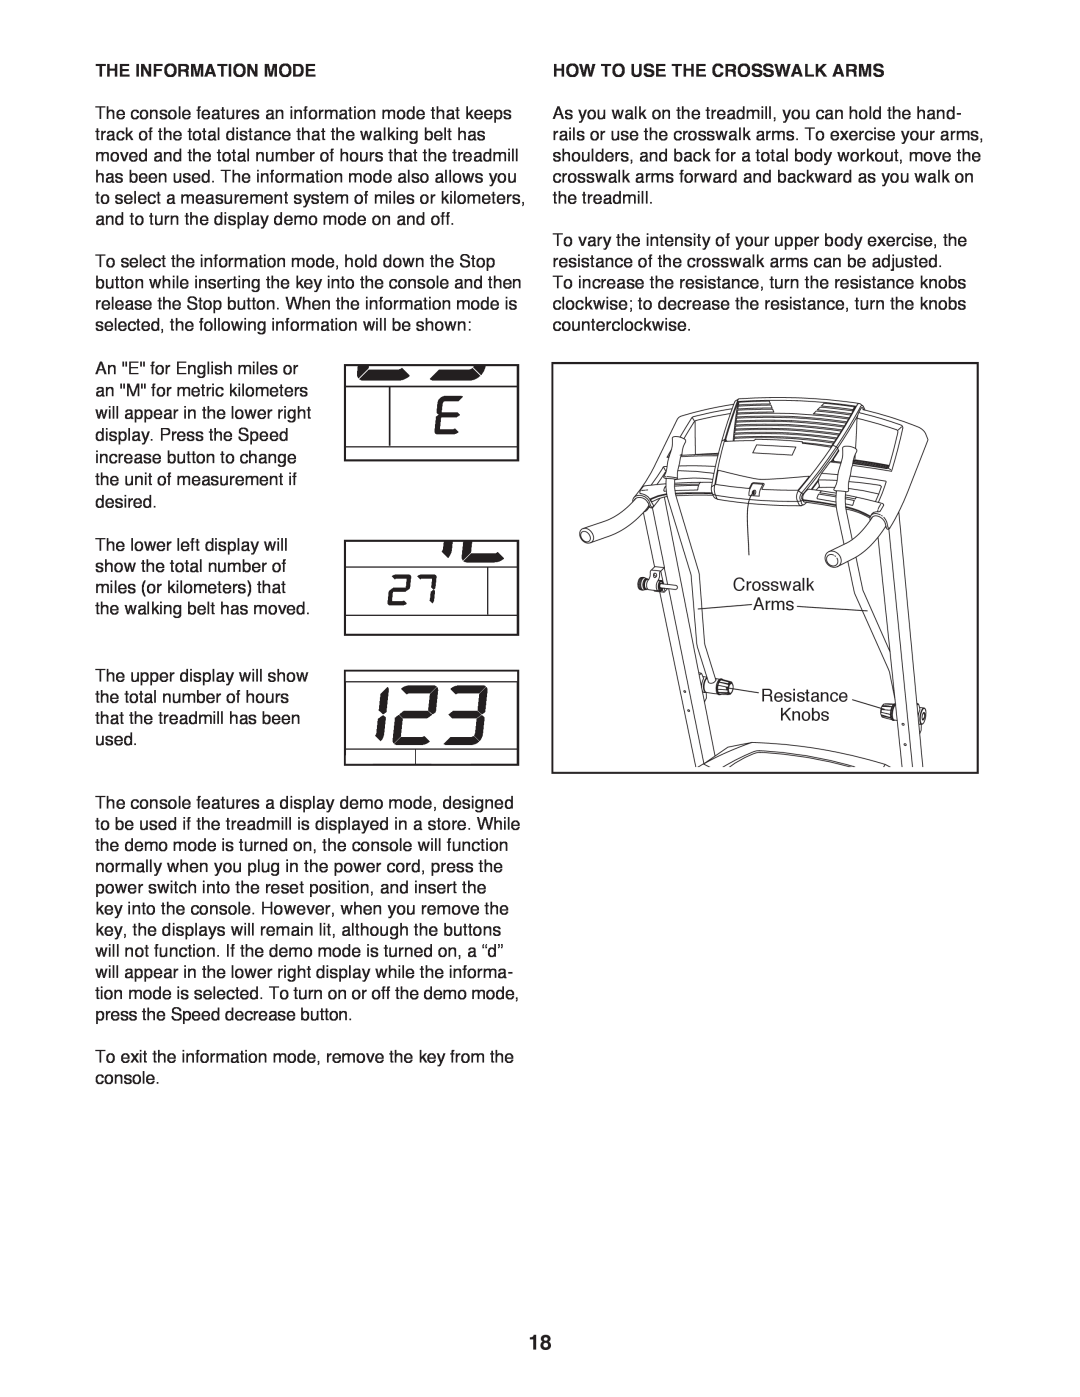 Weslo WLTL39312.0 user manual The Information Mode, How To Use The Crosswalk Arms 